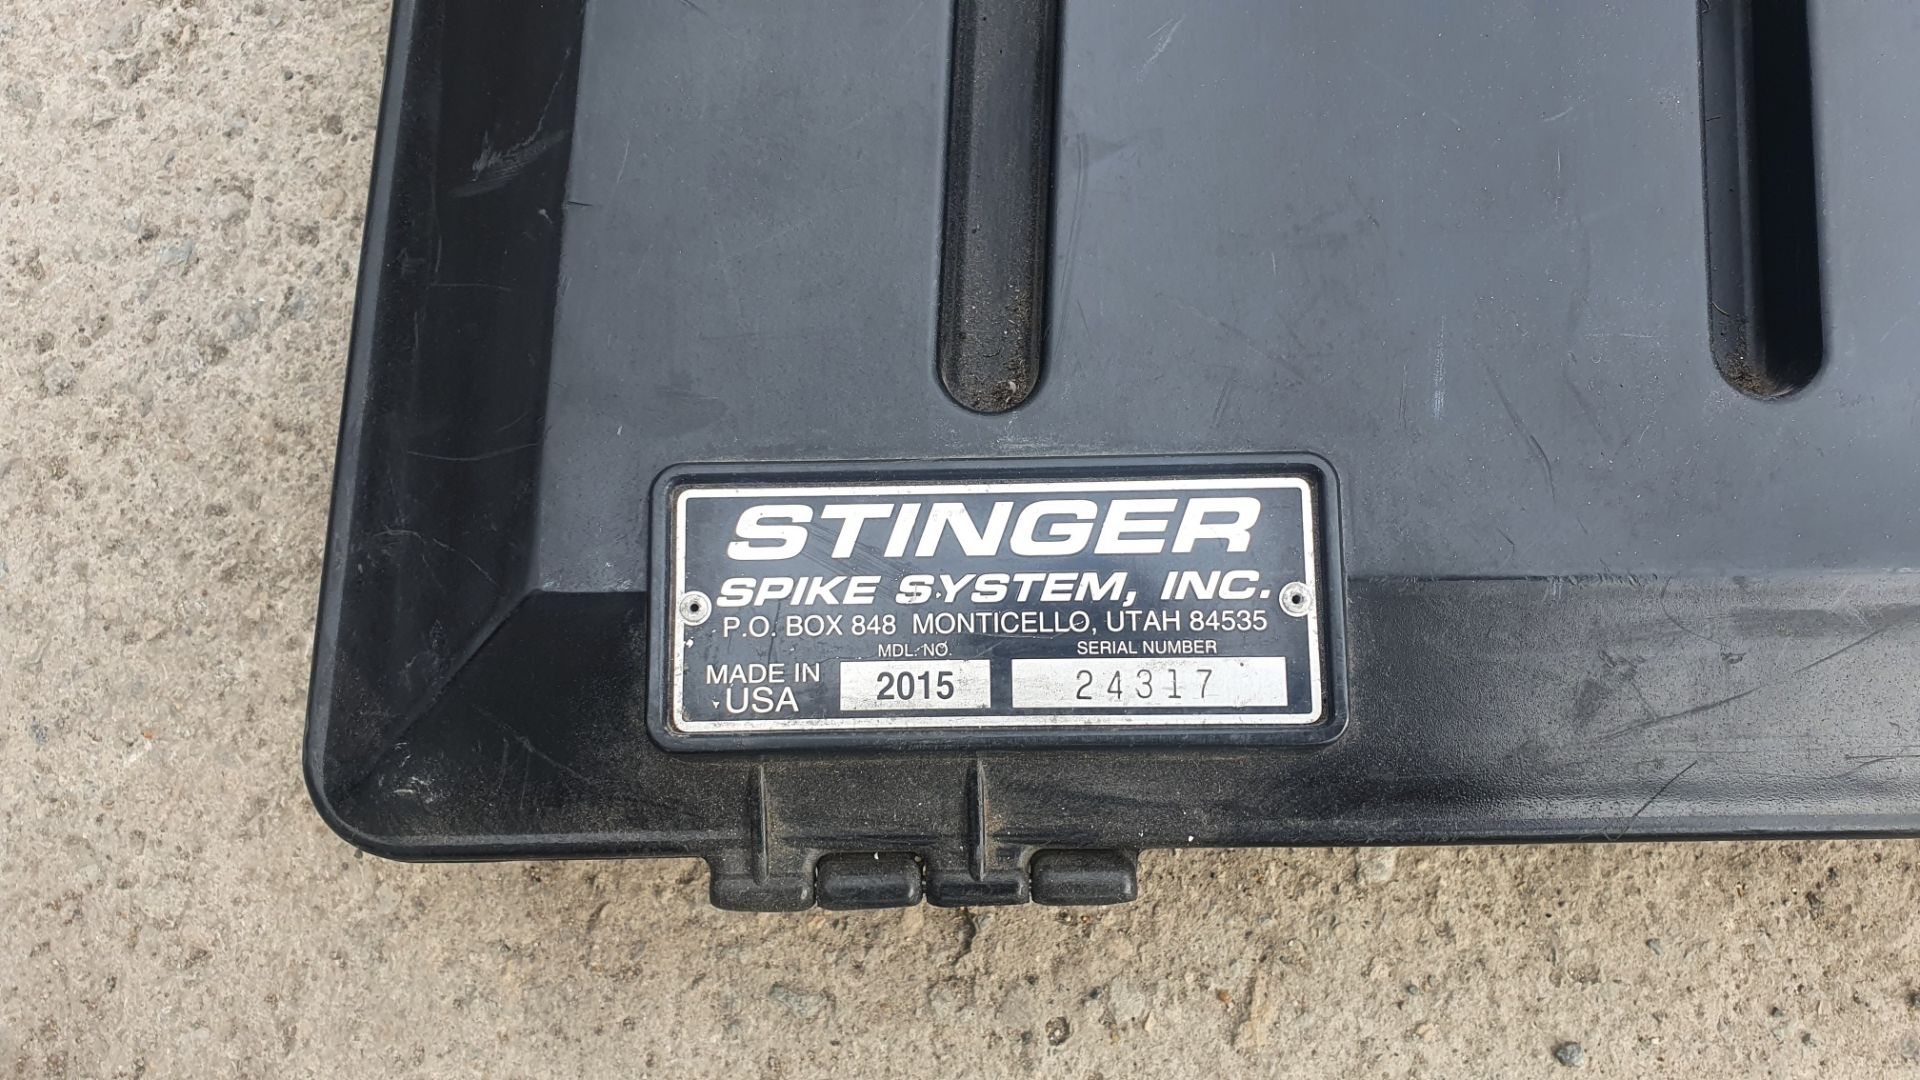 American Made Police Stinger In Case - Image 4 of 7